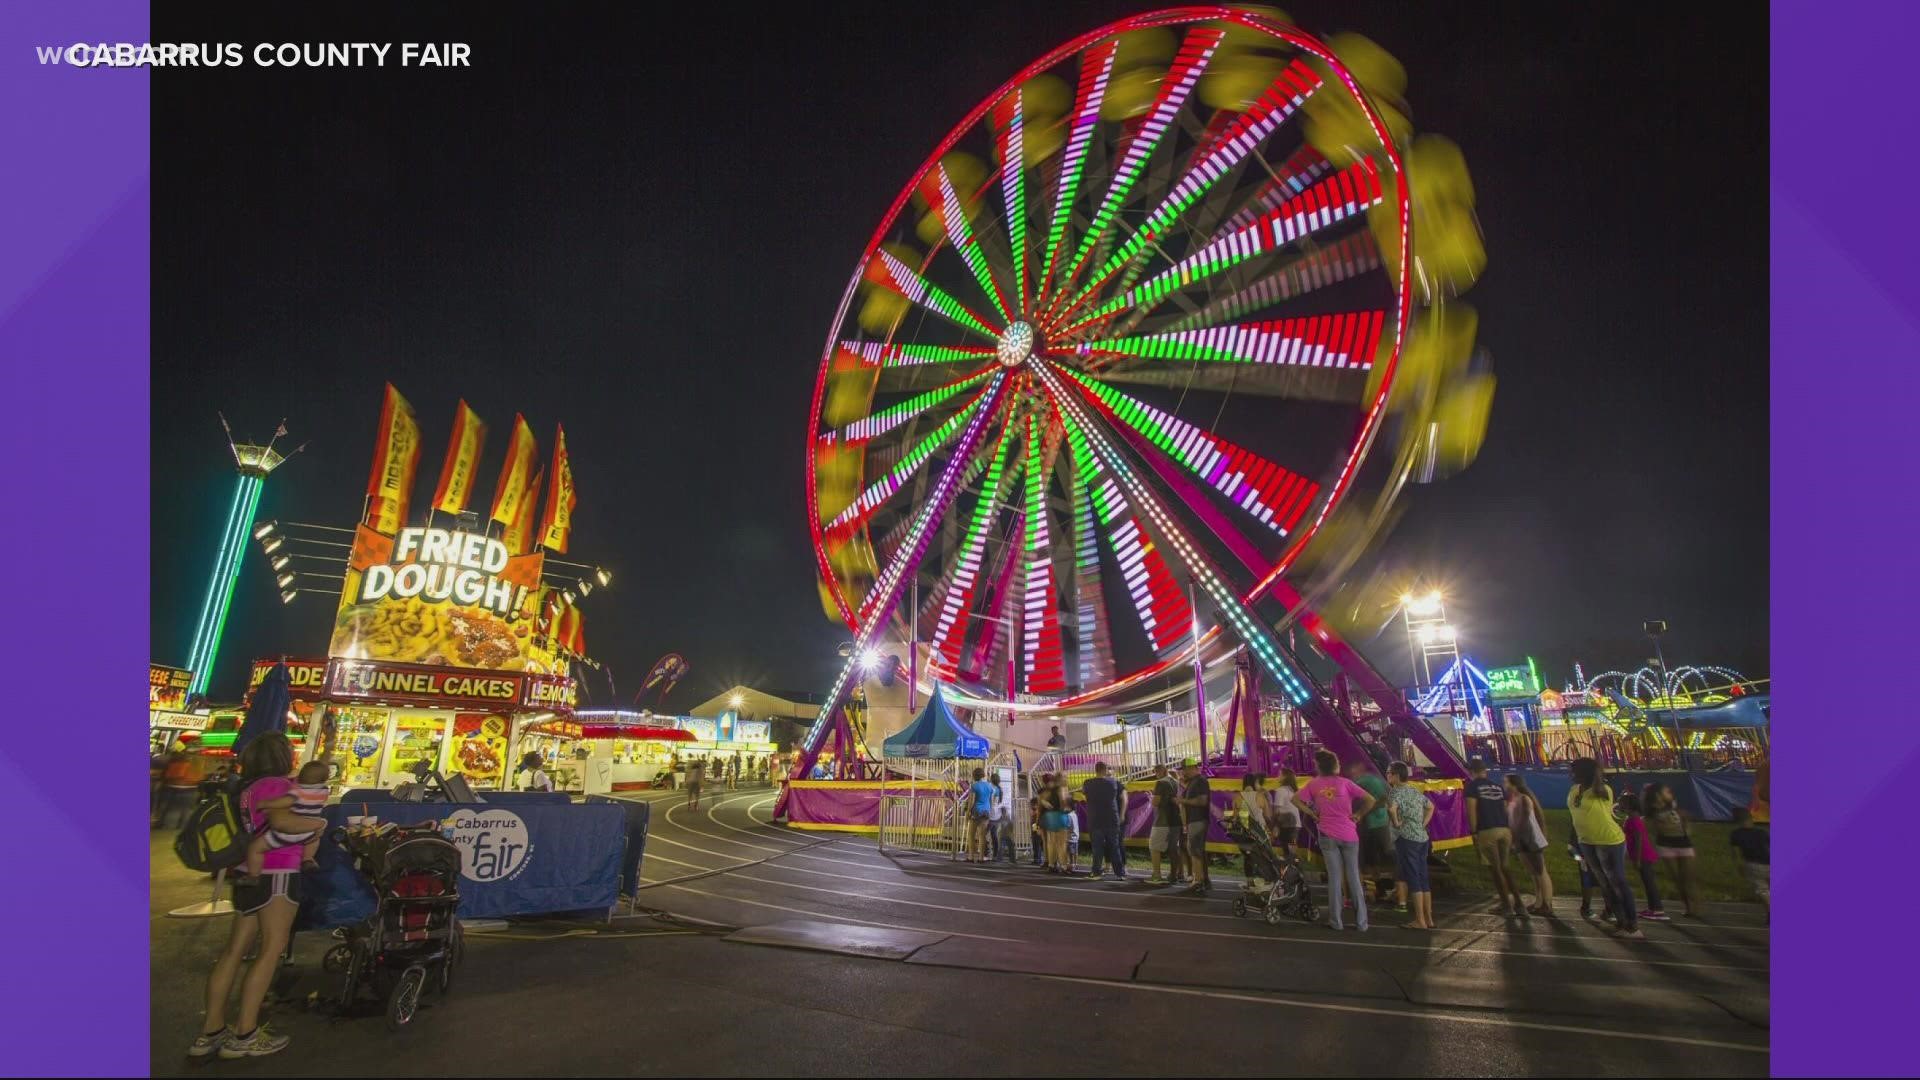 It was scheduled to run from Sept. 10-18. This is only the second cancellation since the fair began in 1953.